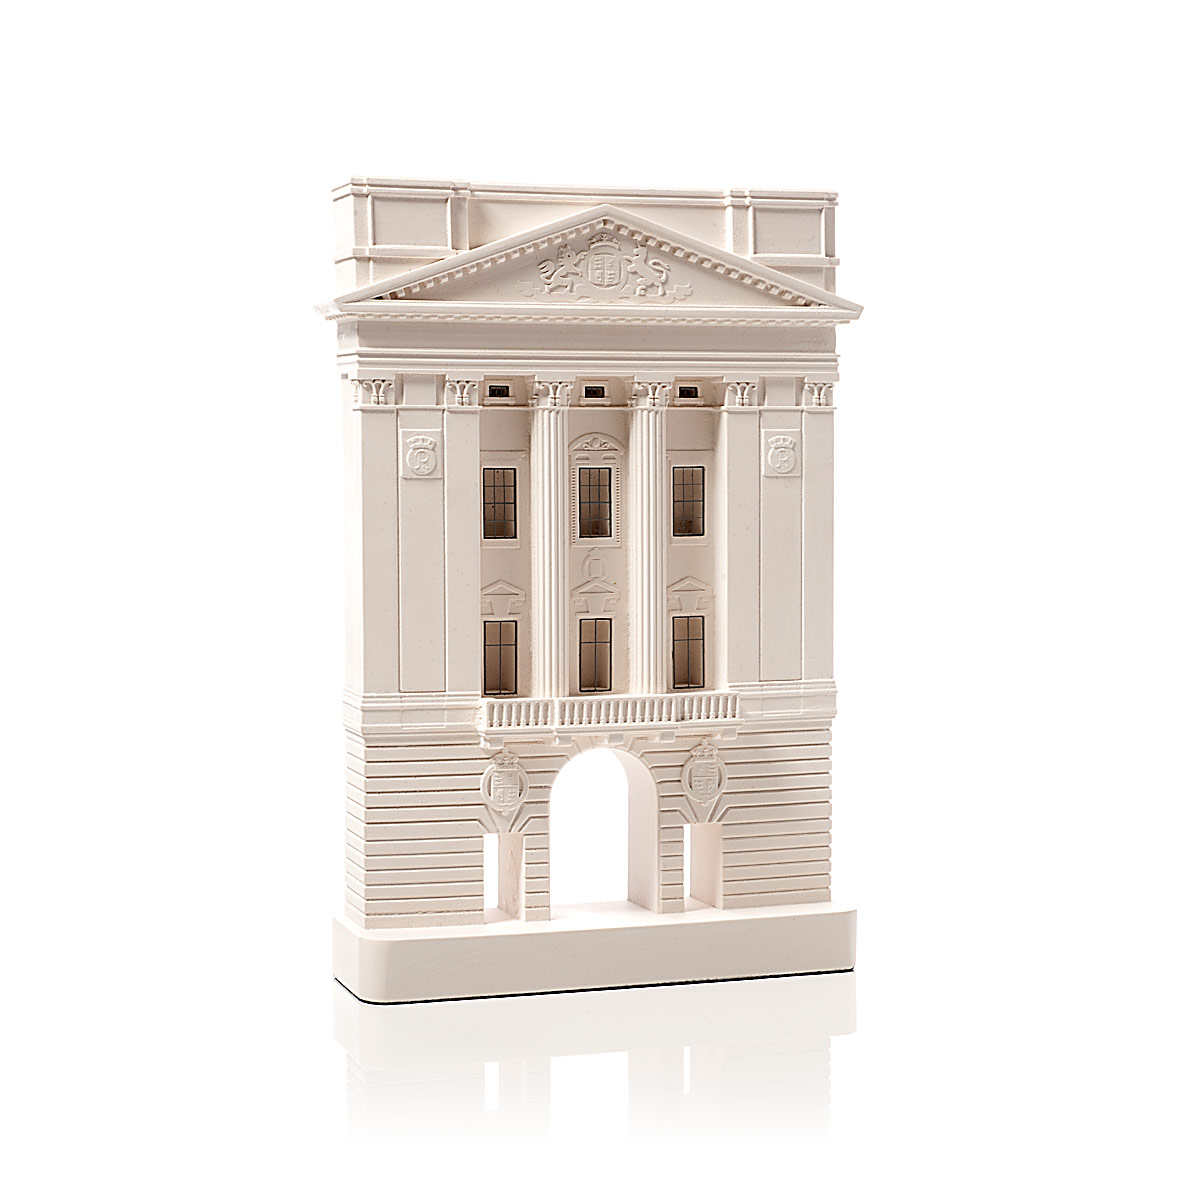 Detailed Hand Made Model in Gypsum Plaster 6 cm high NEW Buckingham Palace 